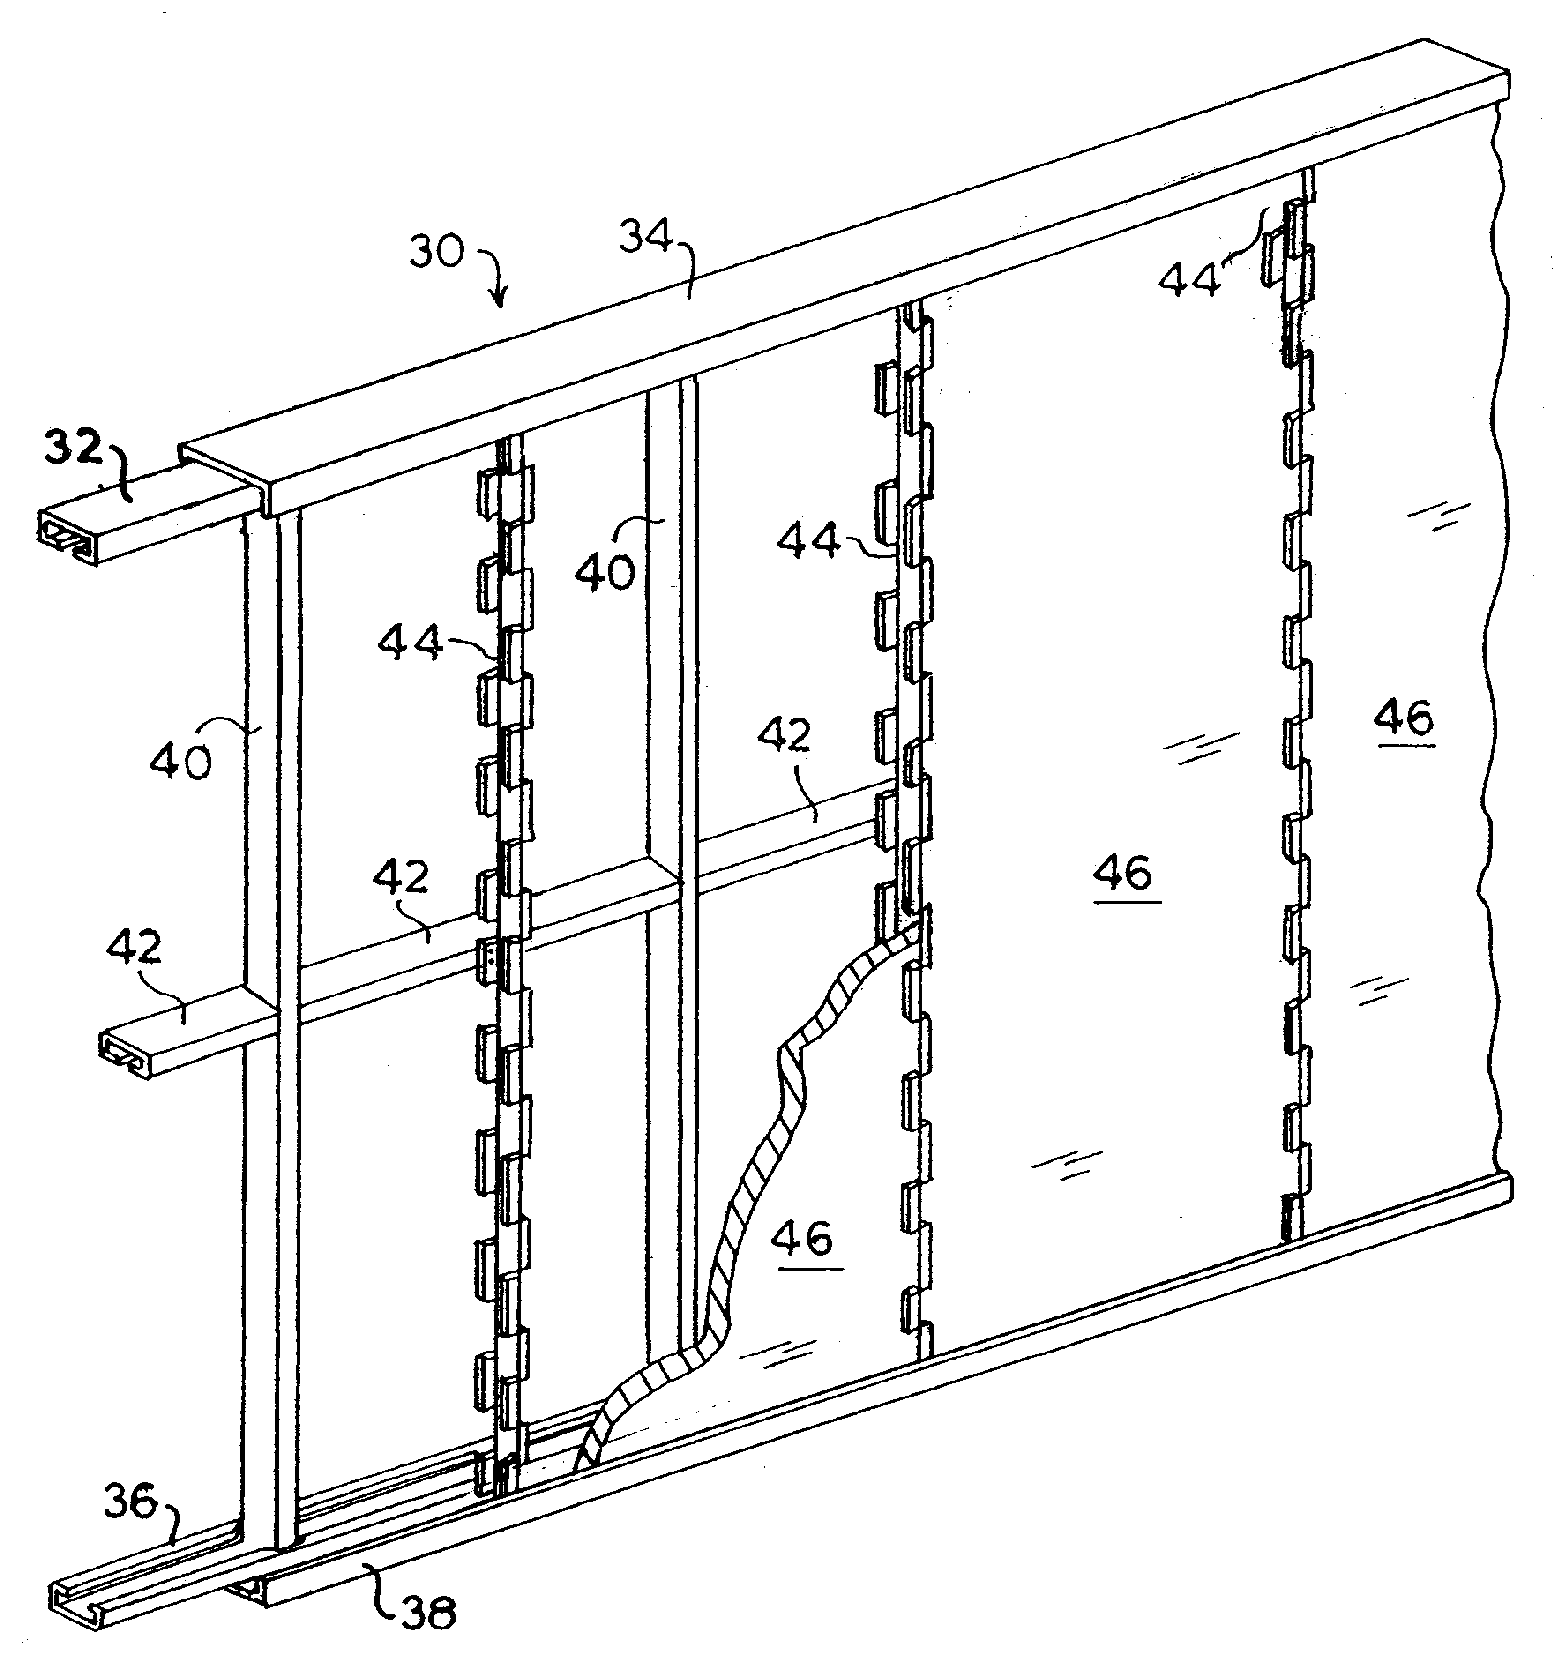 Thermal wall system